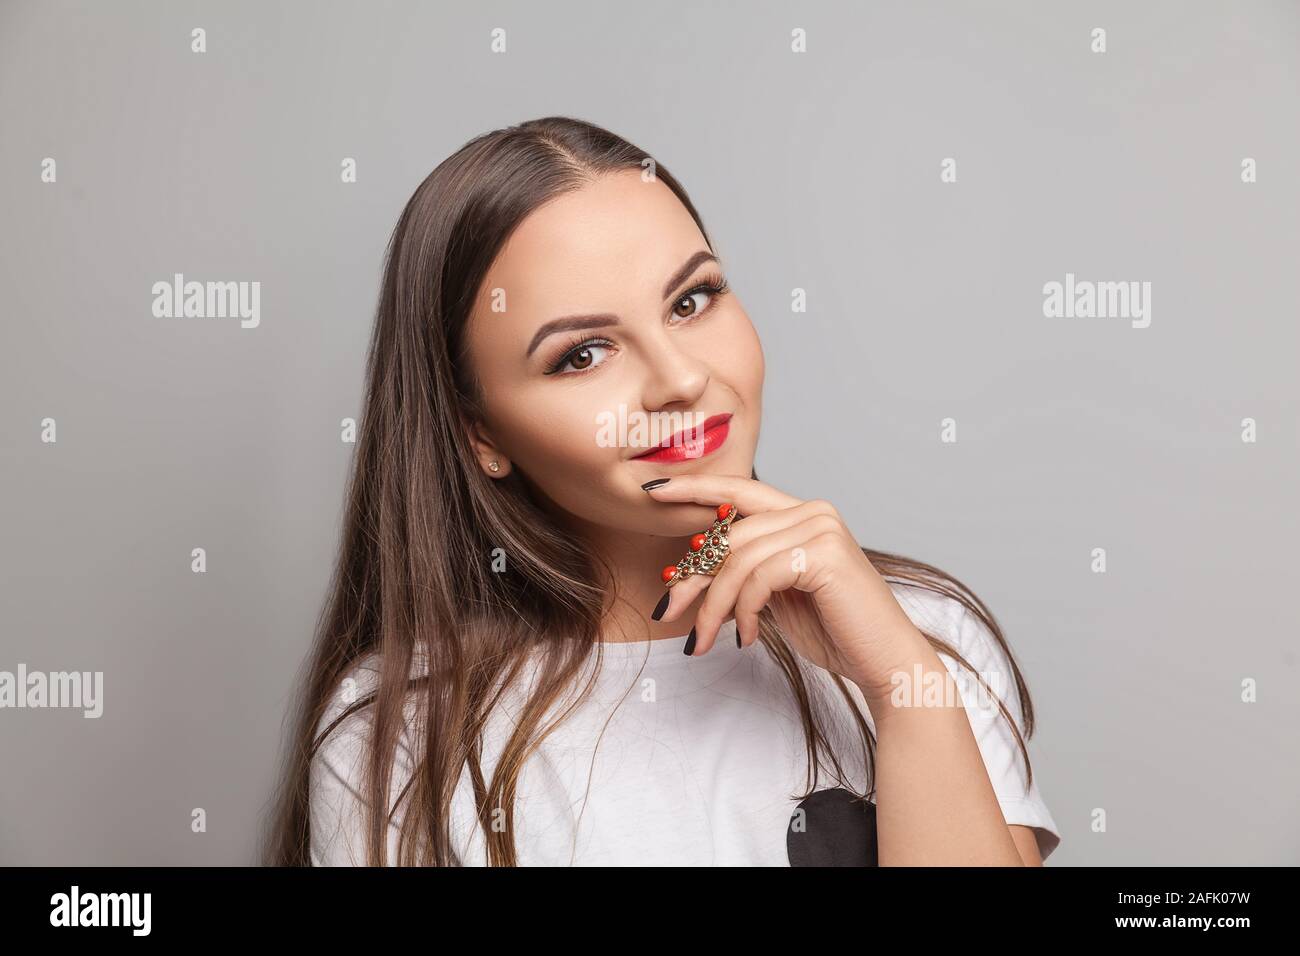 Portrait of young sexy playful brunette girl dressed in white t-shirt standing against isolated gray background. Woman looking at camera. Stock Photo